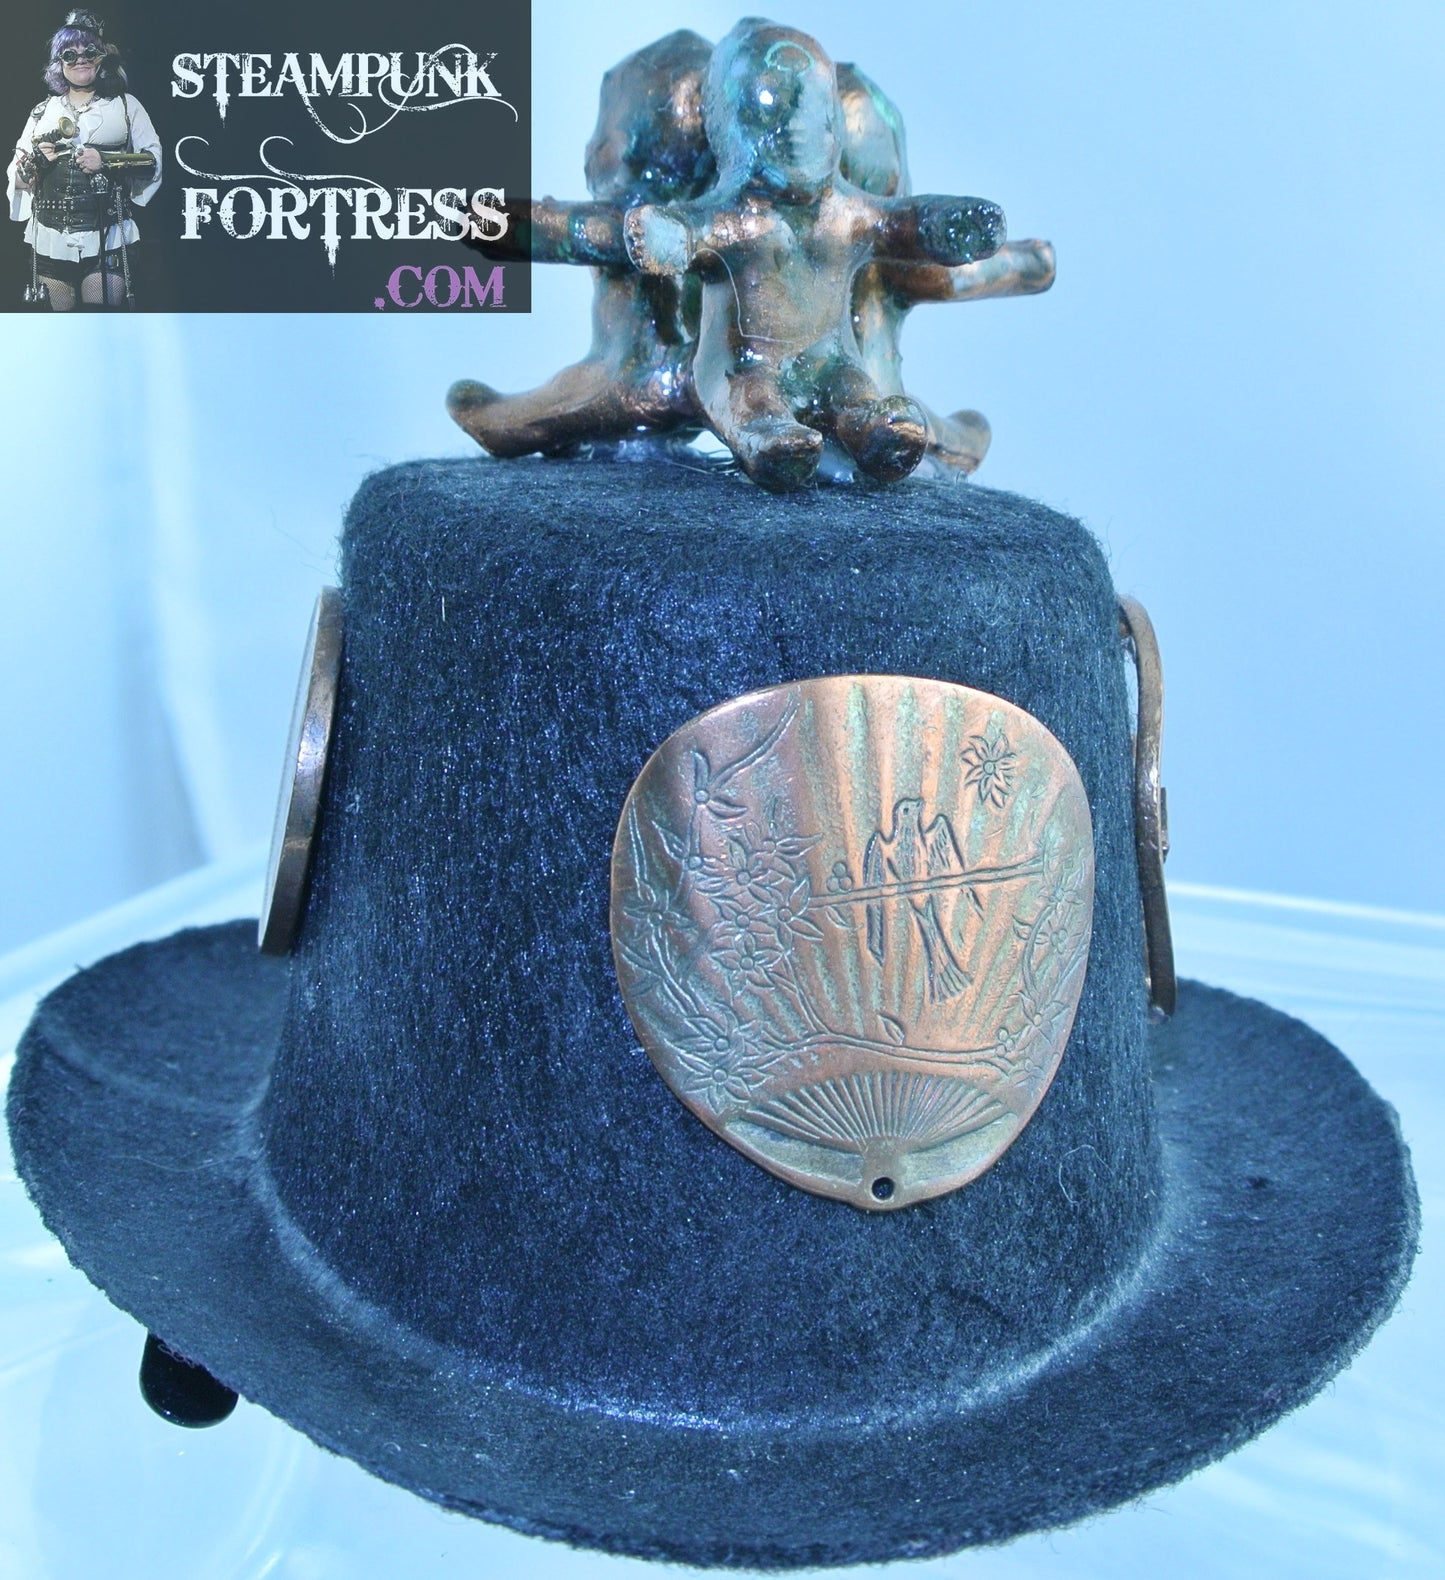 BLACK COPPER FAN COIN FRONT KANGAROO CHARM COPPER DIPPED KEY QUEEN ELIZABETH COIN 3 COPPER DIPPED BABIES TOP XS EXTRA SMALL MINI TOP HAT STARR WILDE STEAMPUNK FORTRESS